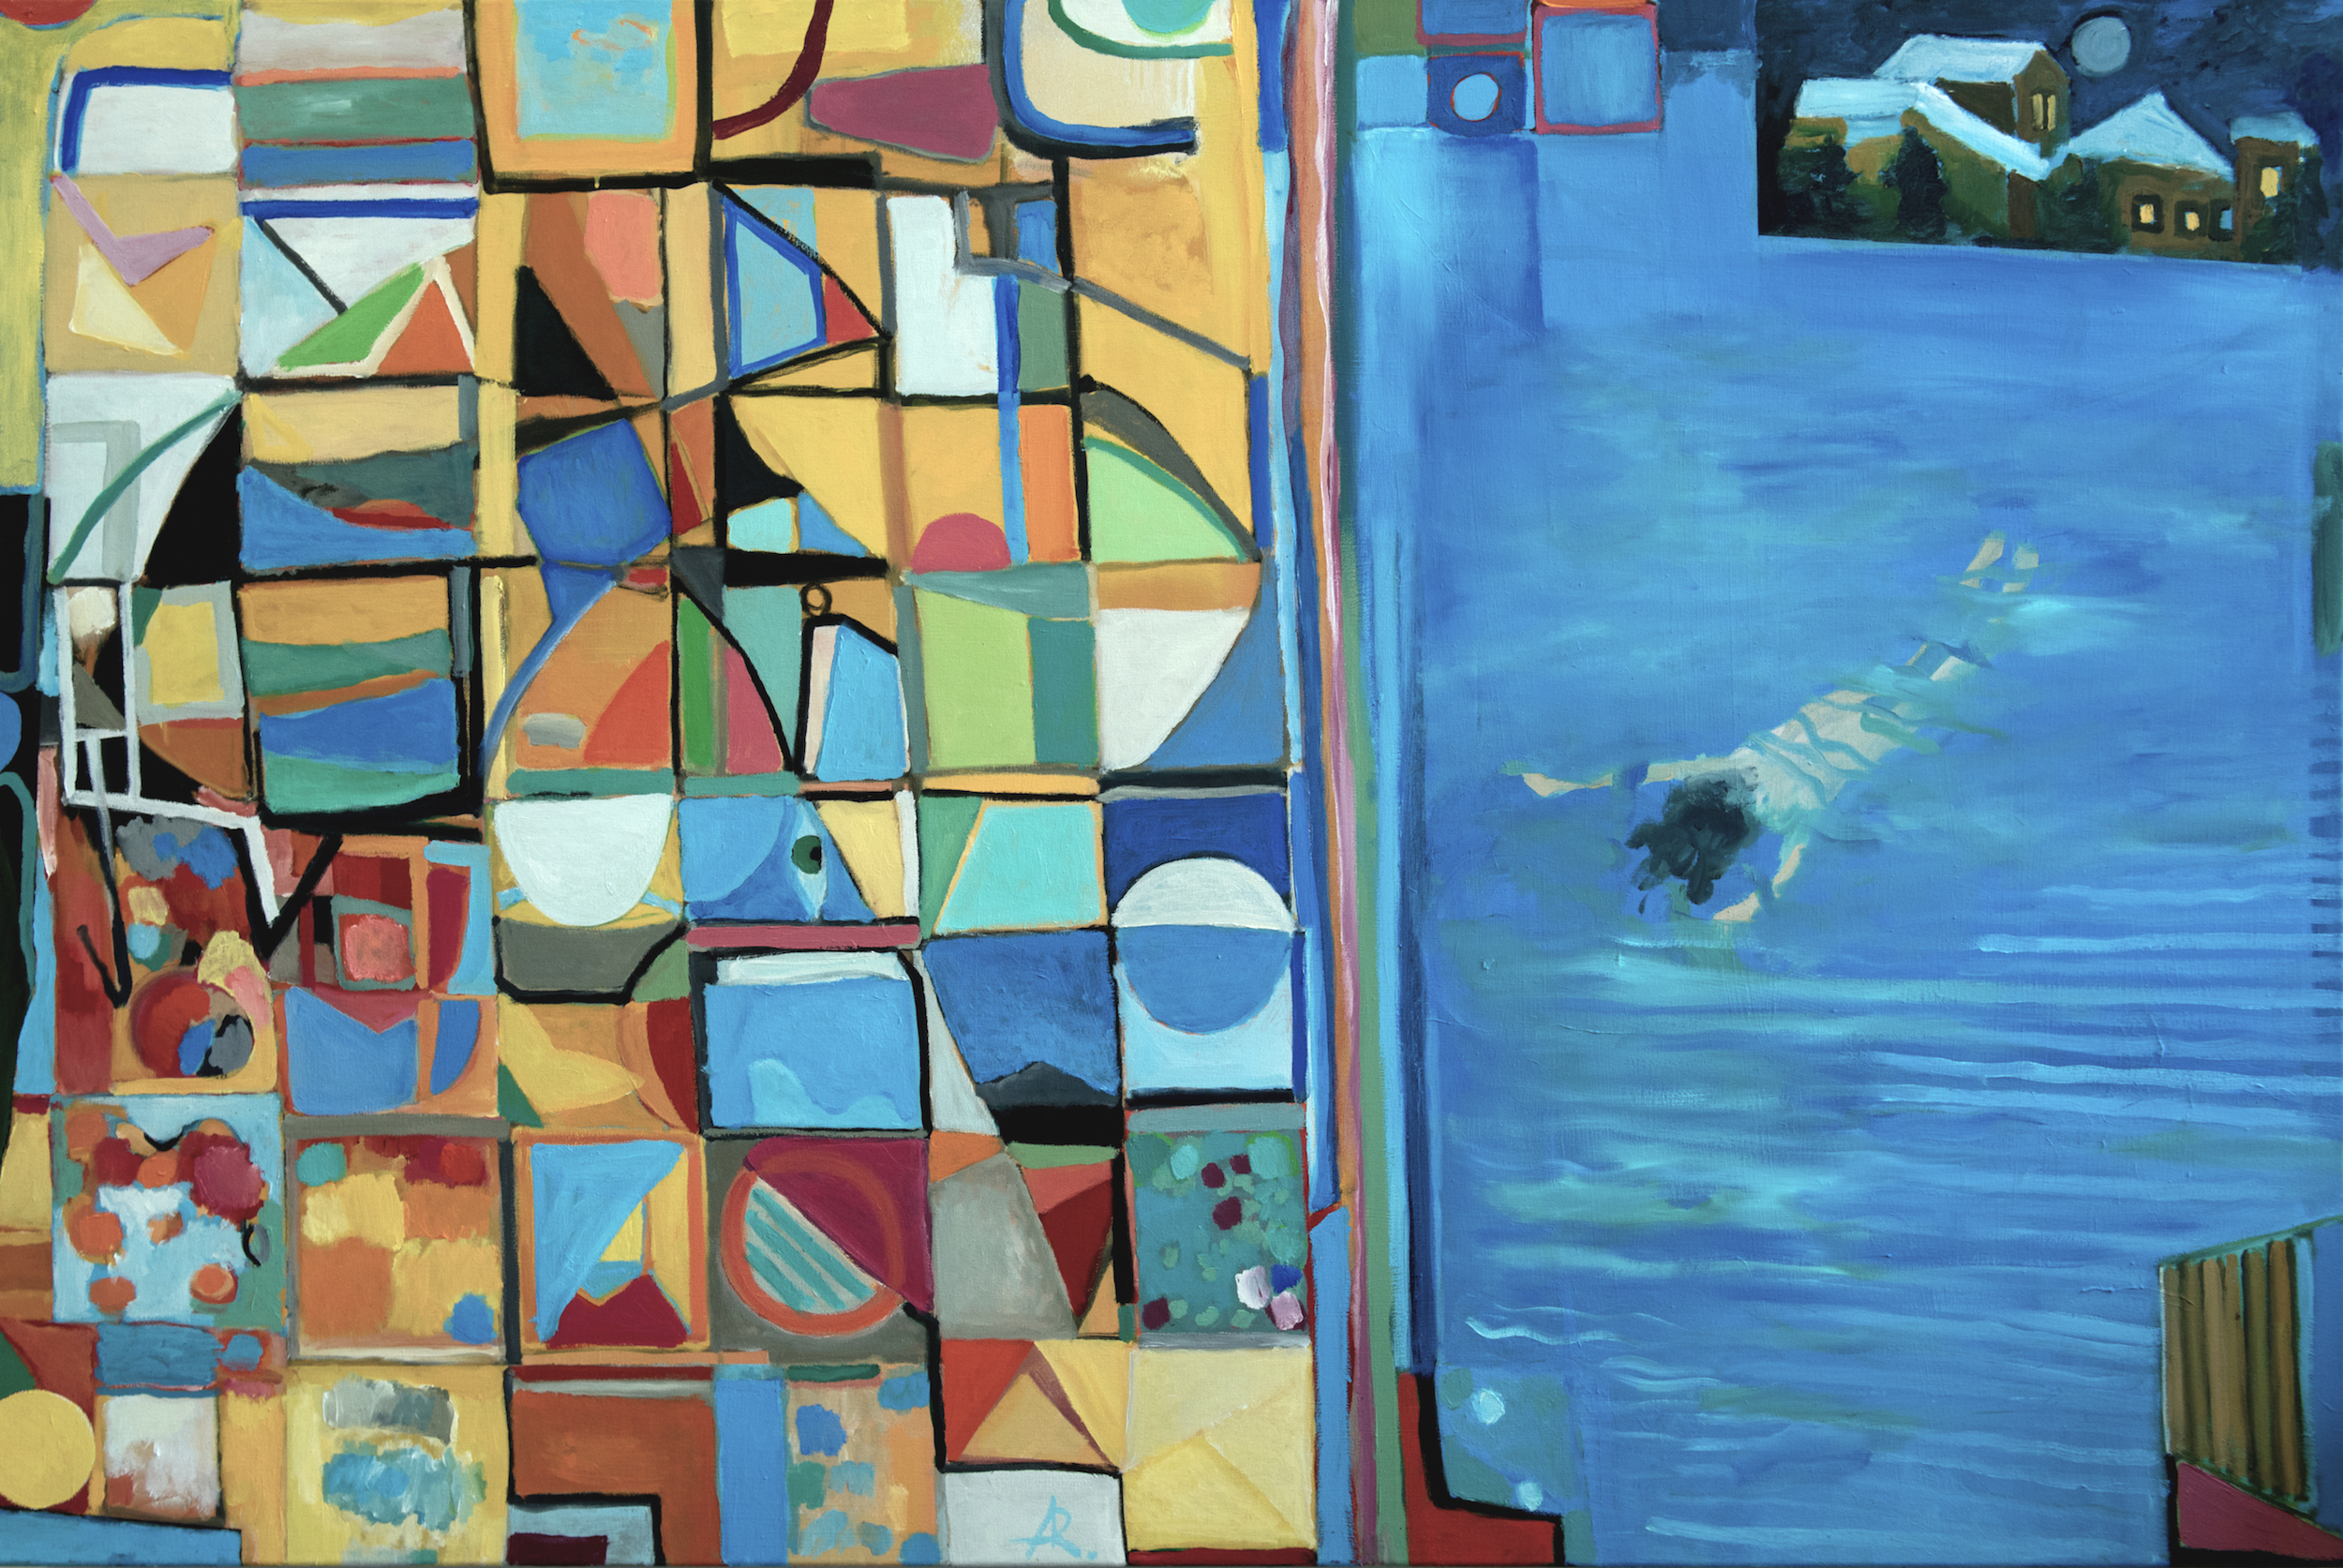  “Diving into Modernism,” painting by Alexandra Rozenman 